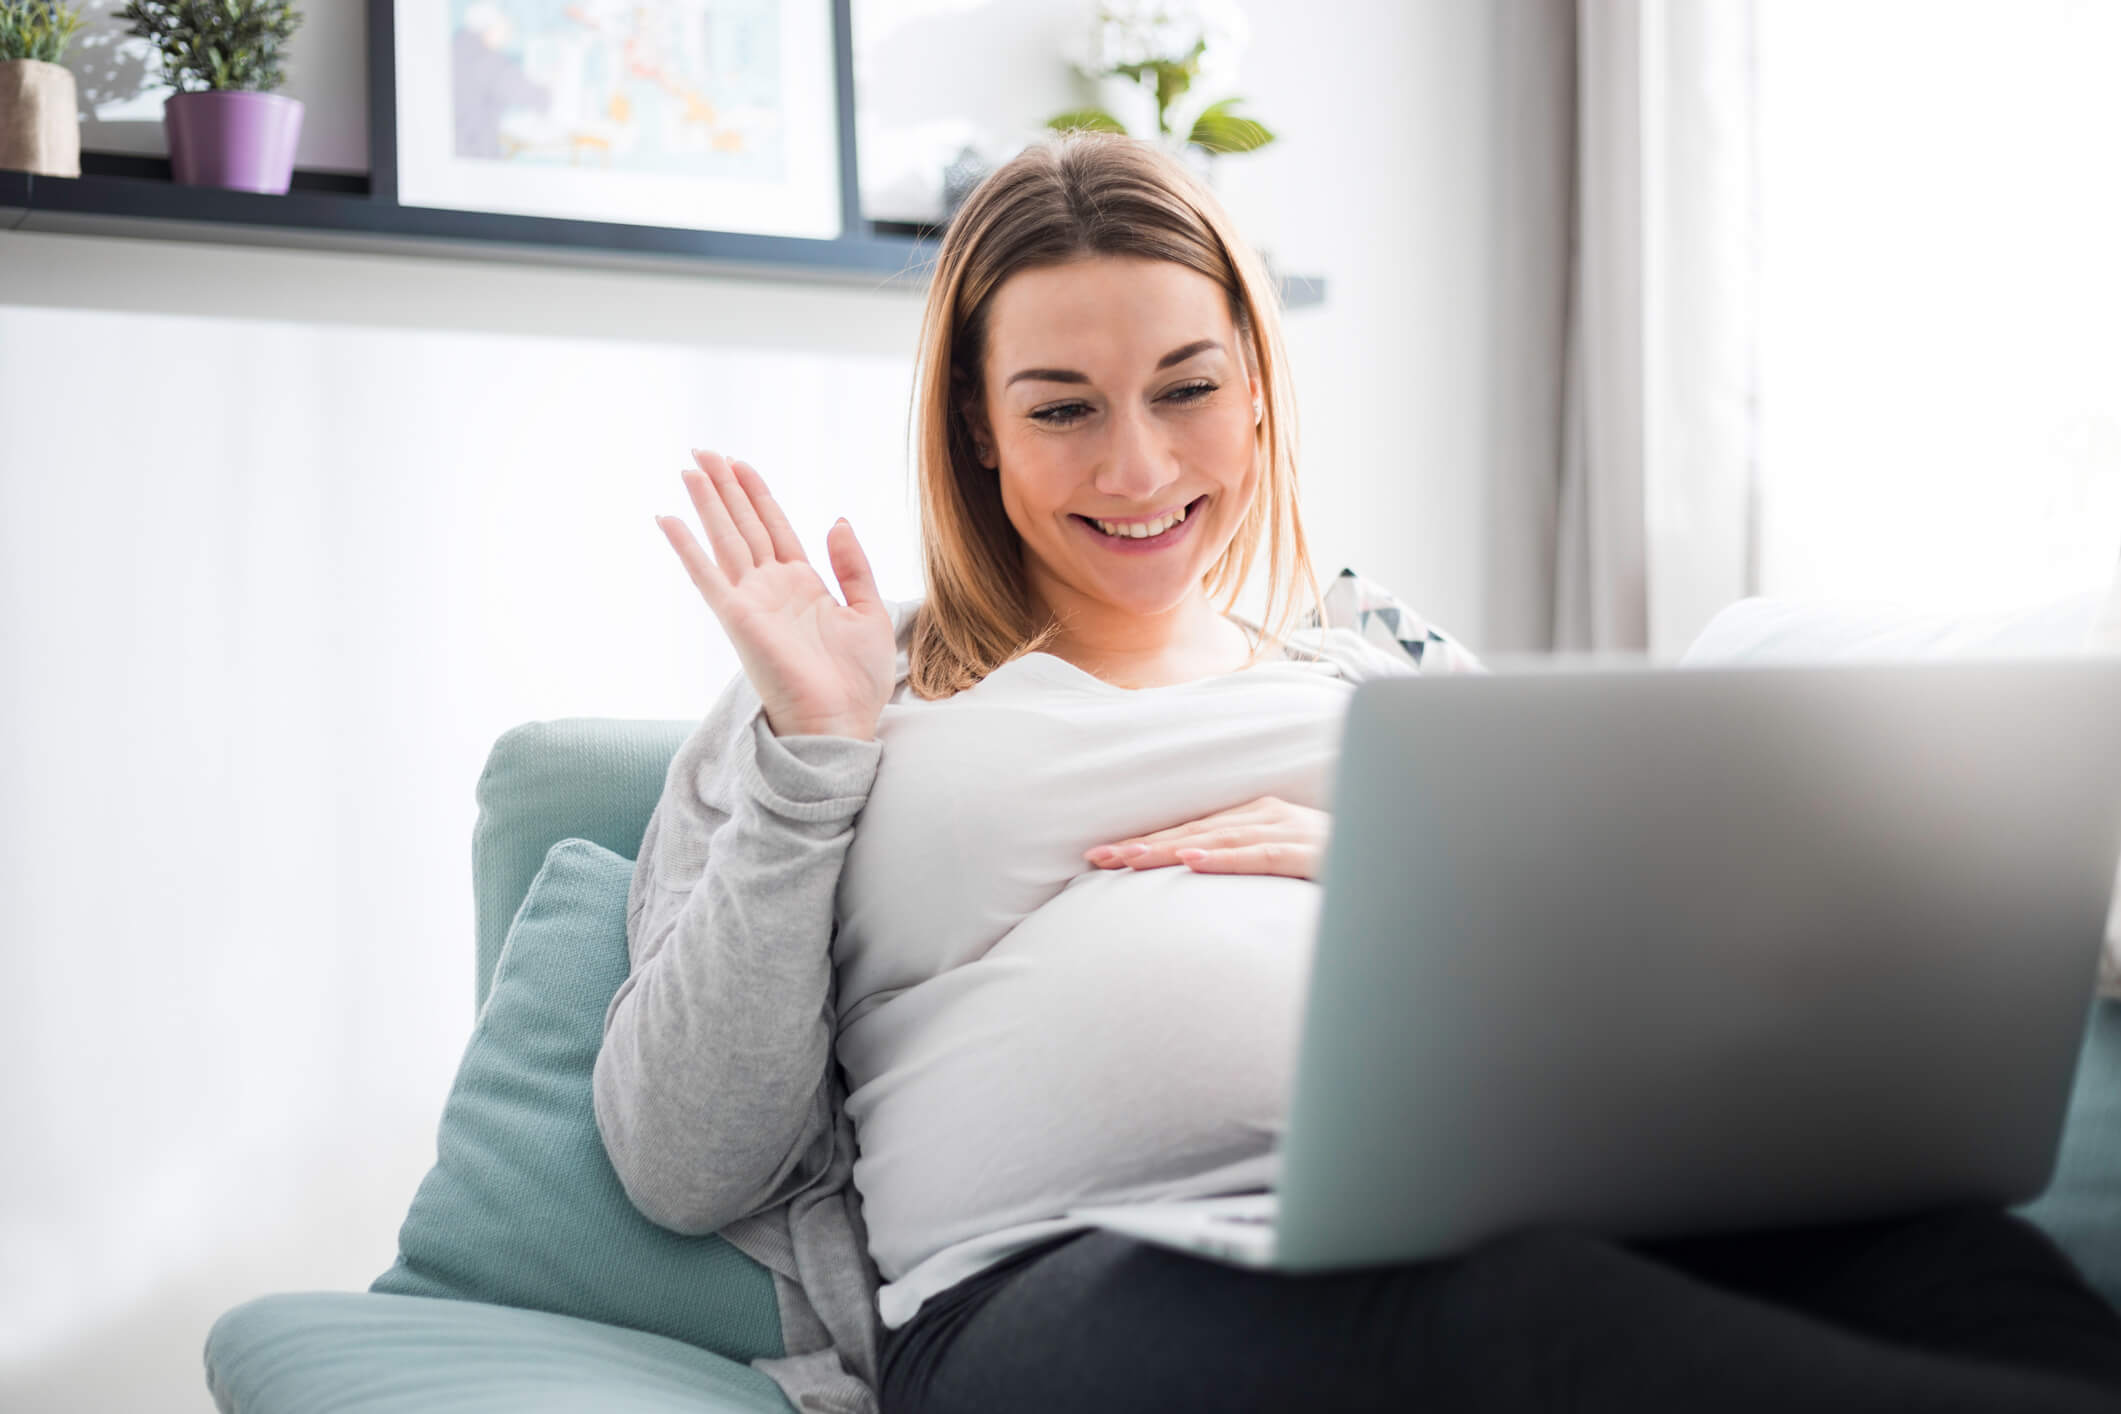 Pregnant woman video chatting with family on laptop waving hand to screen